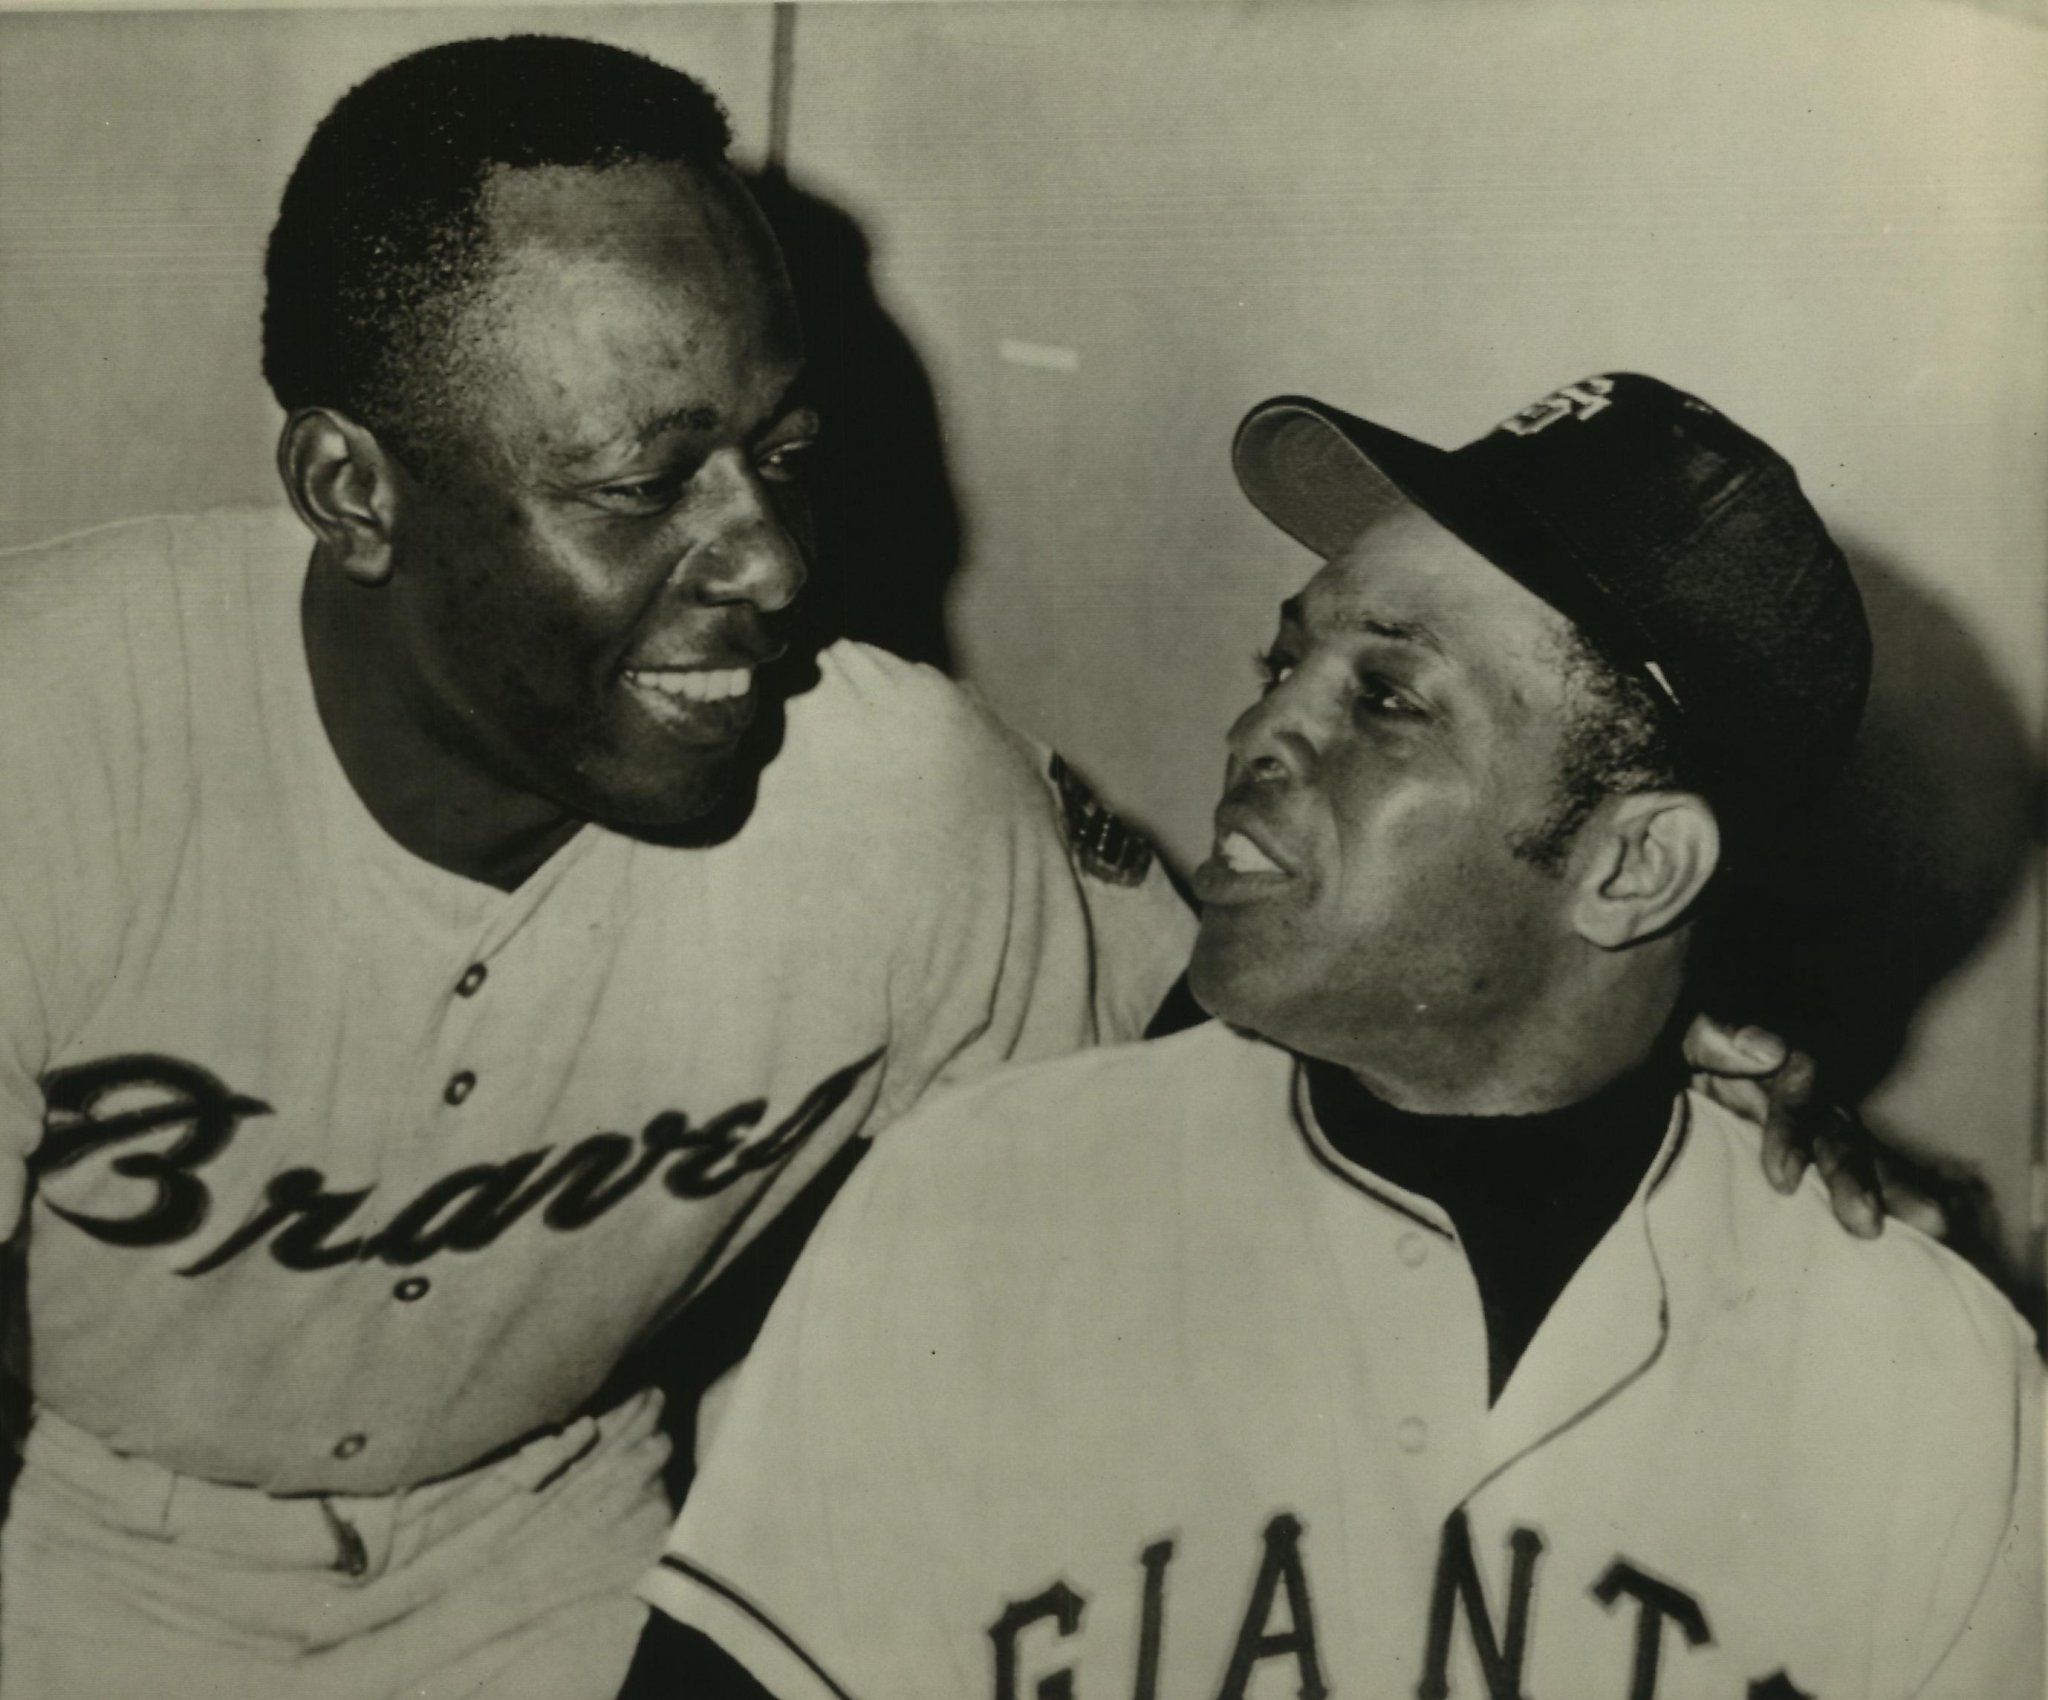 Hank Aaron's Giants connections go deeper than Willie Mays and